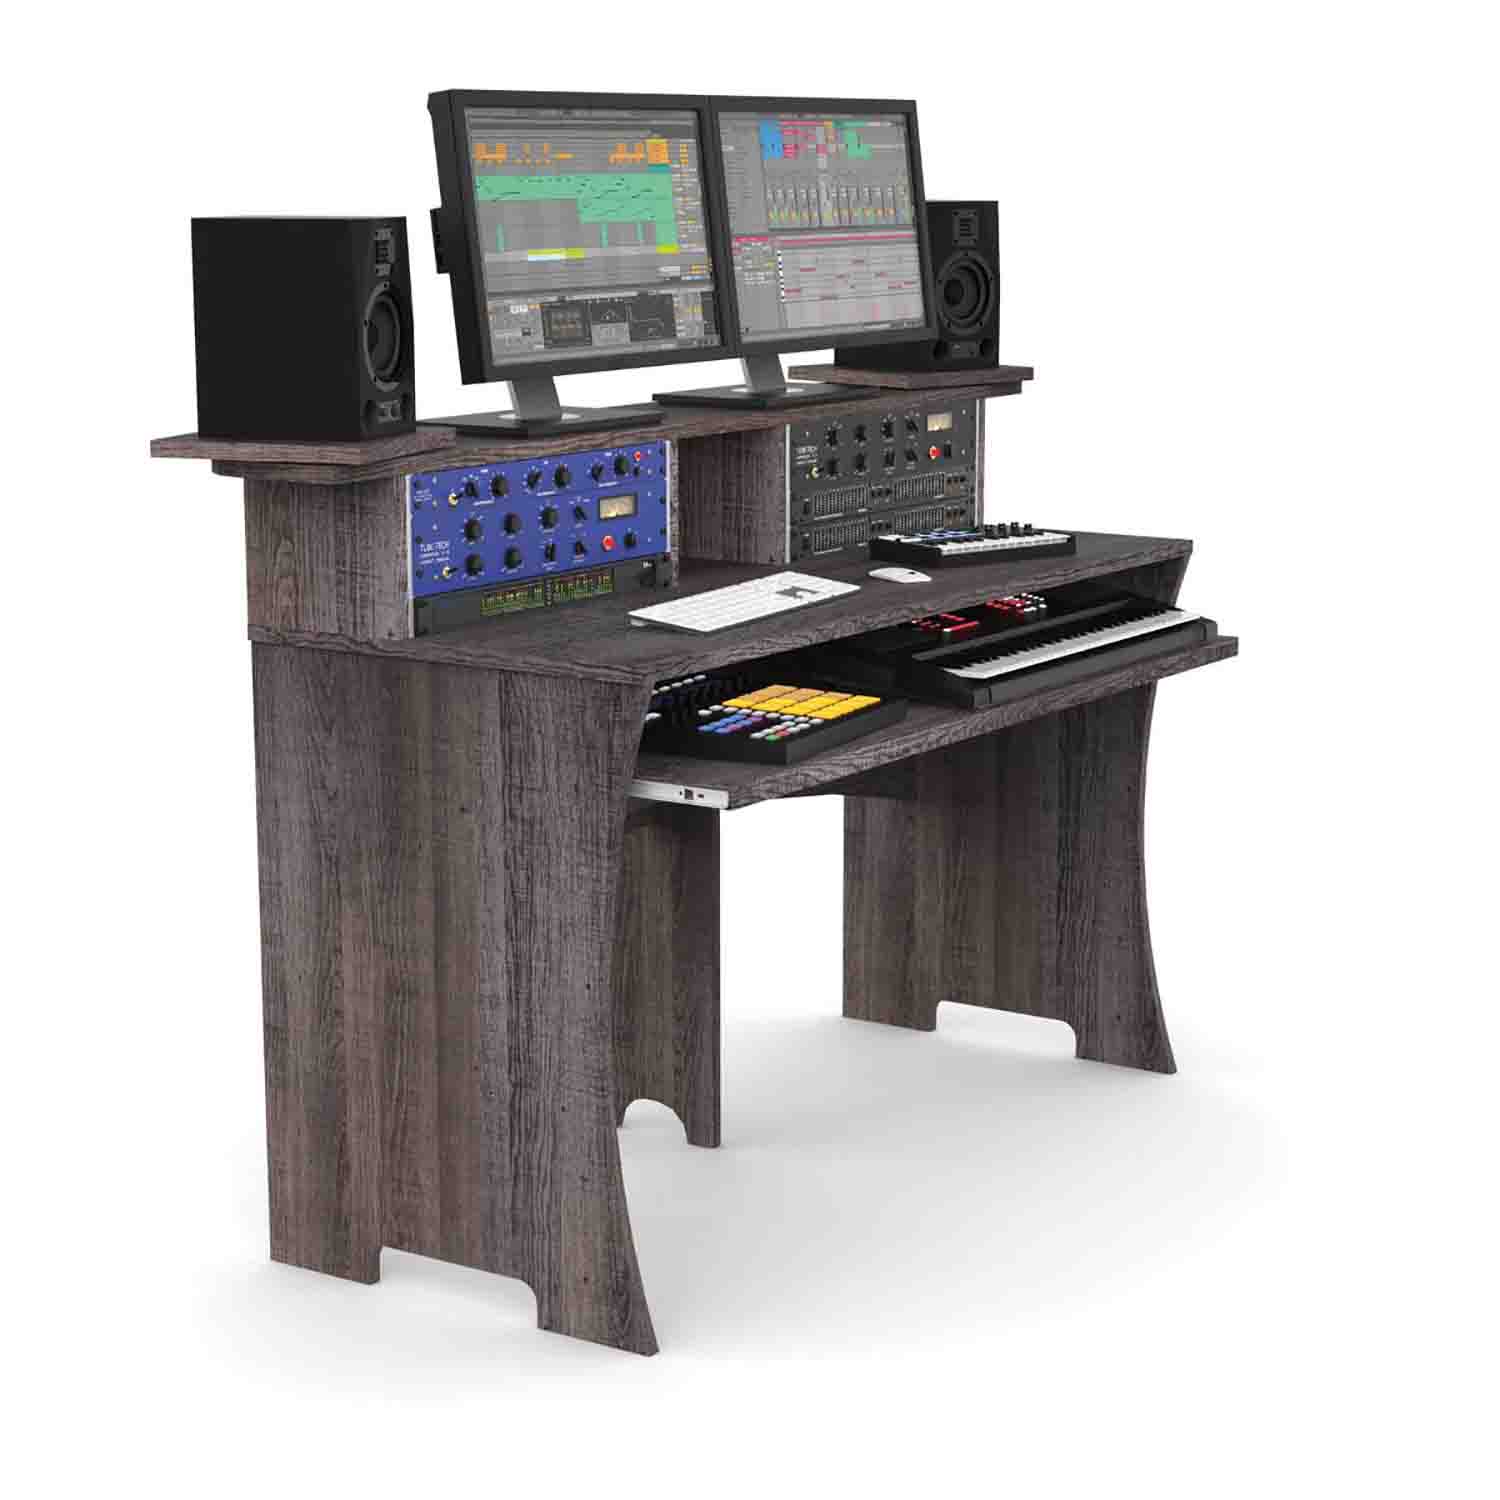 Glorious Workbench for Home and Project Studios - Driftwood - Hollywood DJ